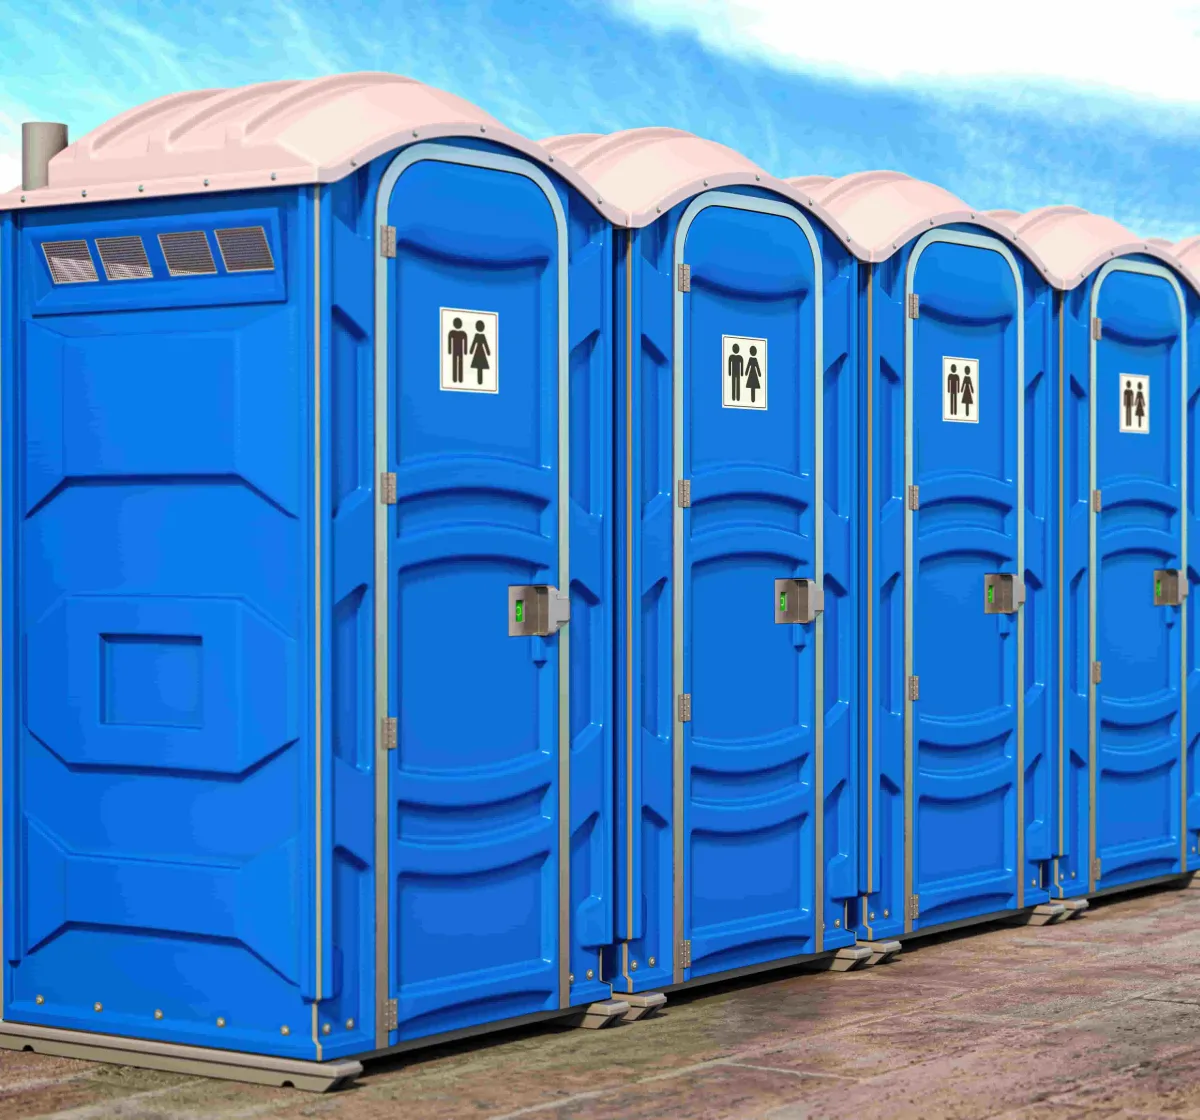 Four blue portable toilets in a row with male and female stickers on all of them